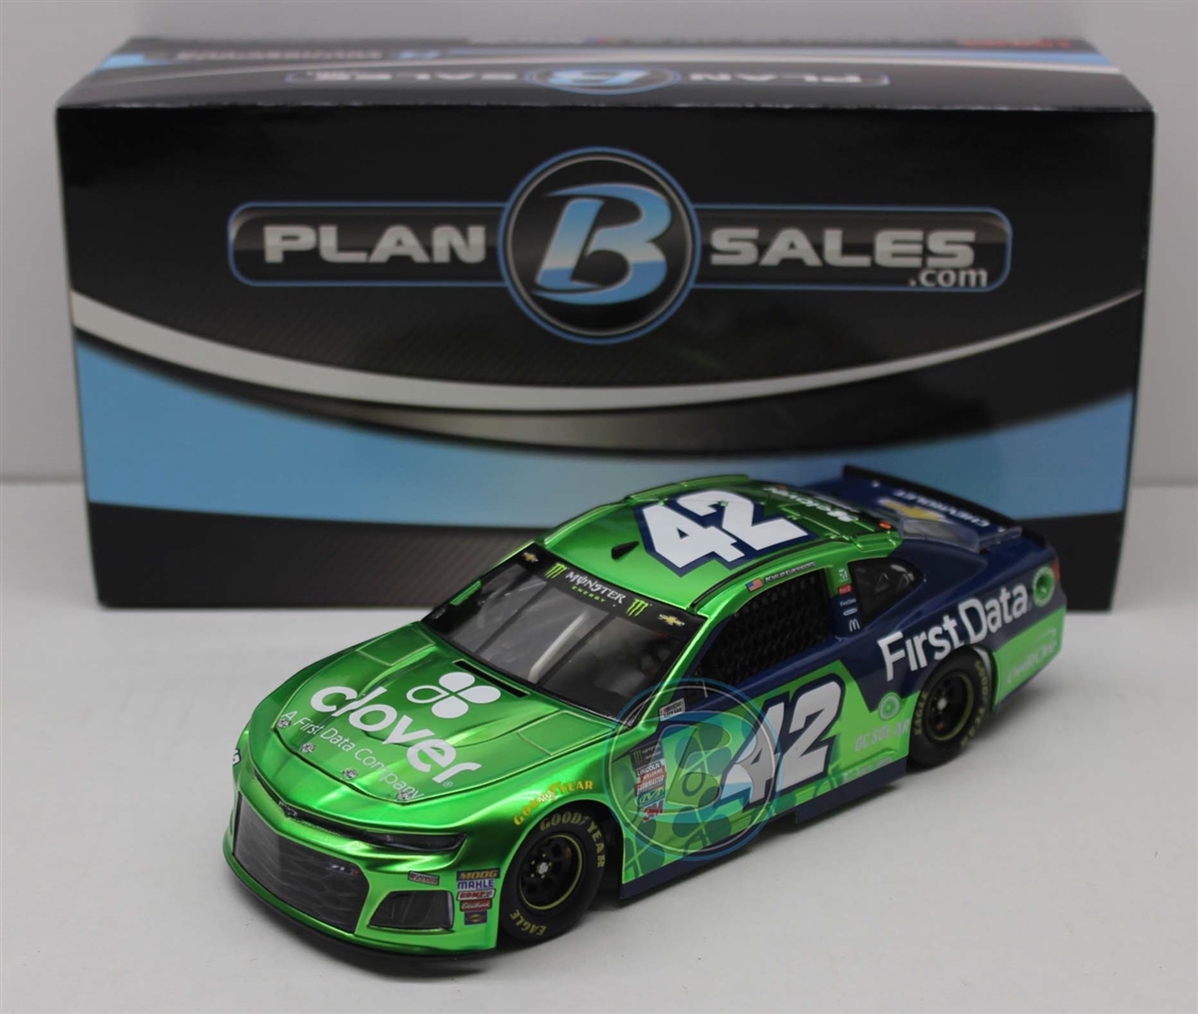 KYLE LARSON #42 2018 FIRST DATA 1/24 SCALE NEW IN STOCK FREE SHIPPING 